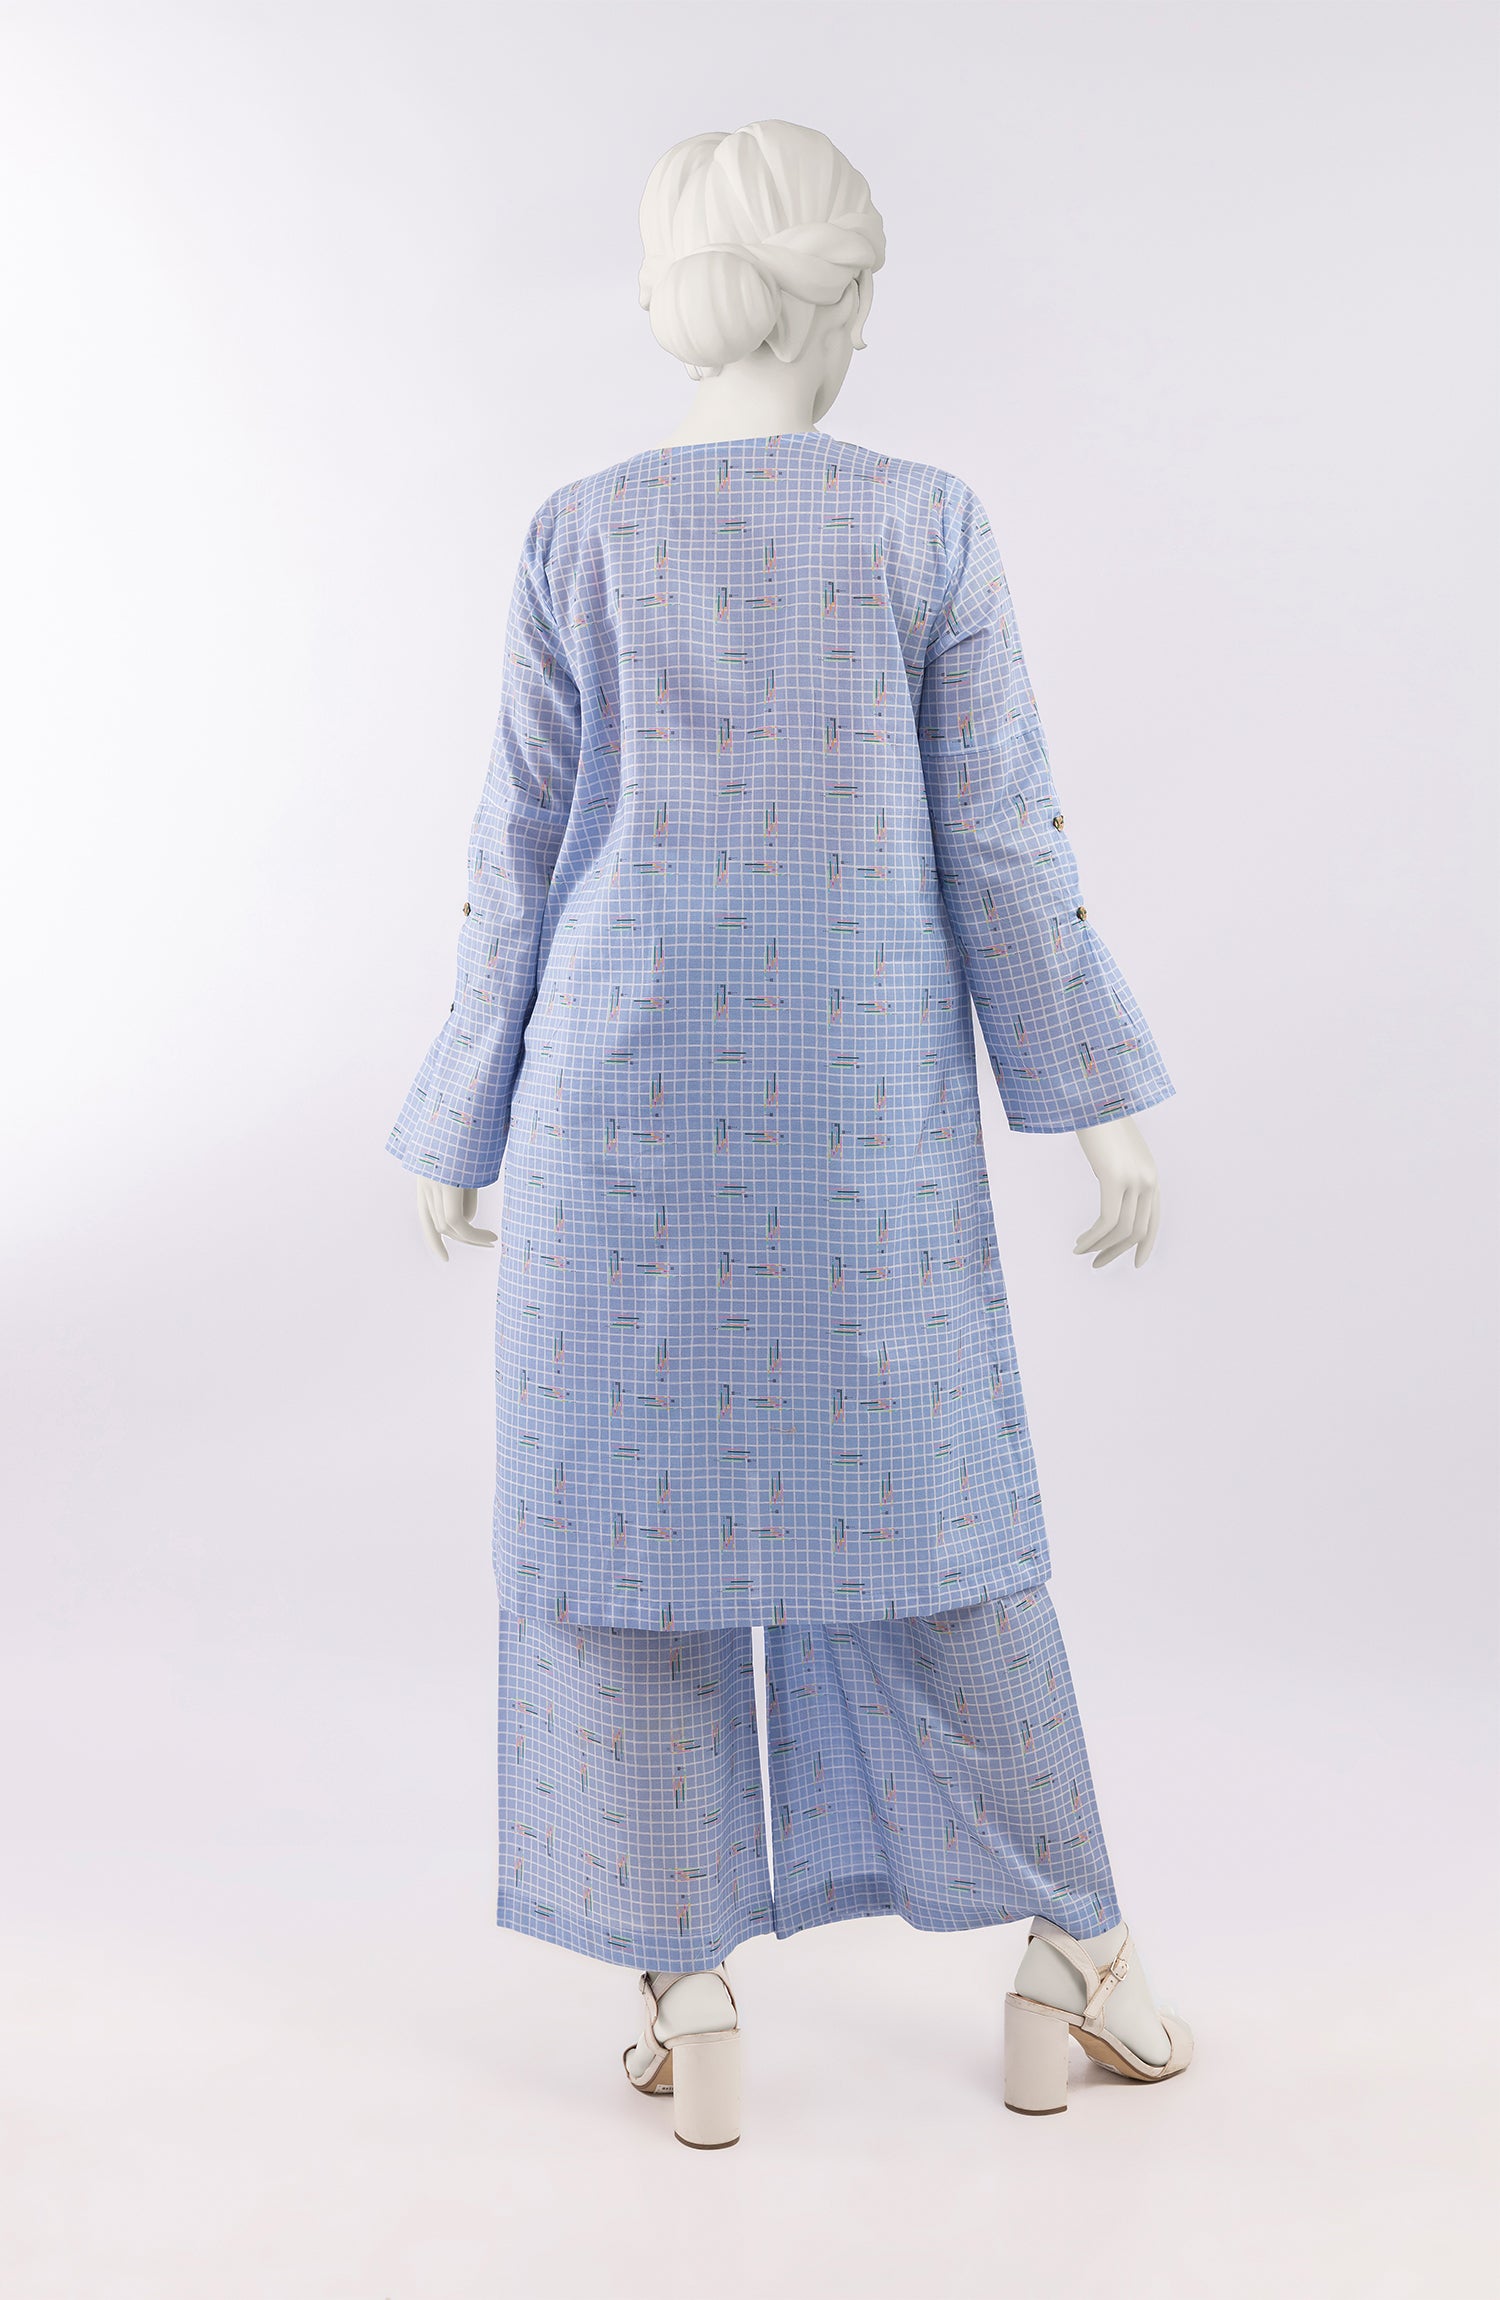 SUMMER'23 PRINTED TECHNICOLOR STITCHED 2PC SUIT